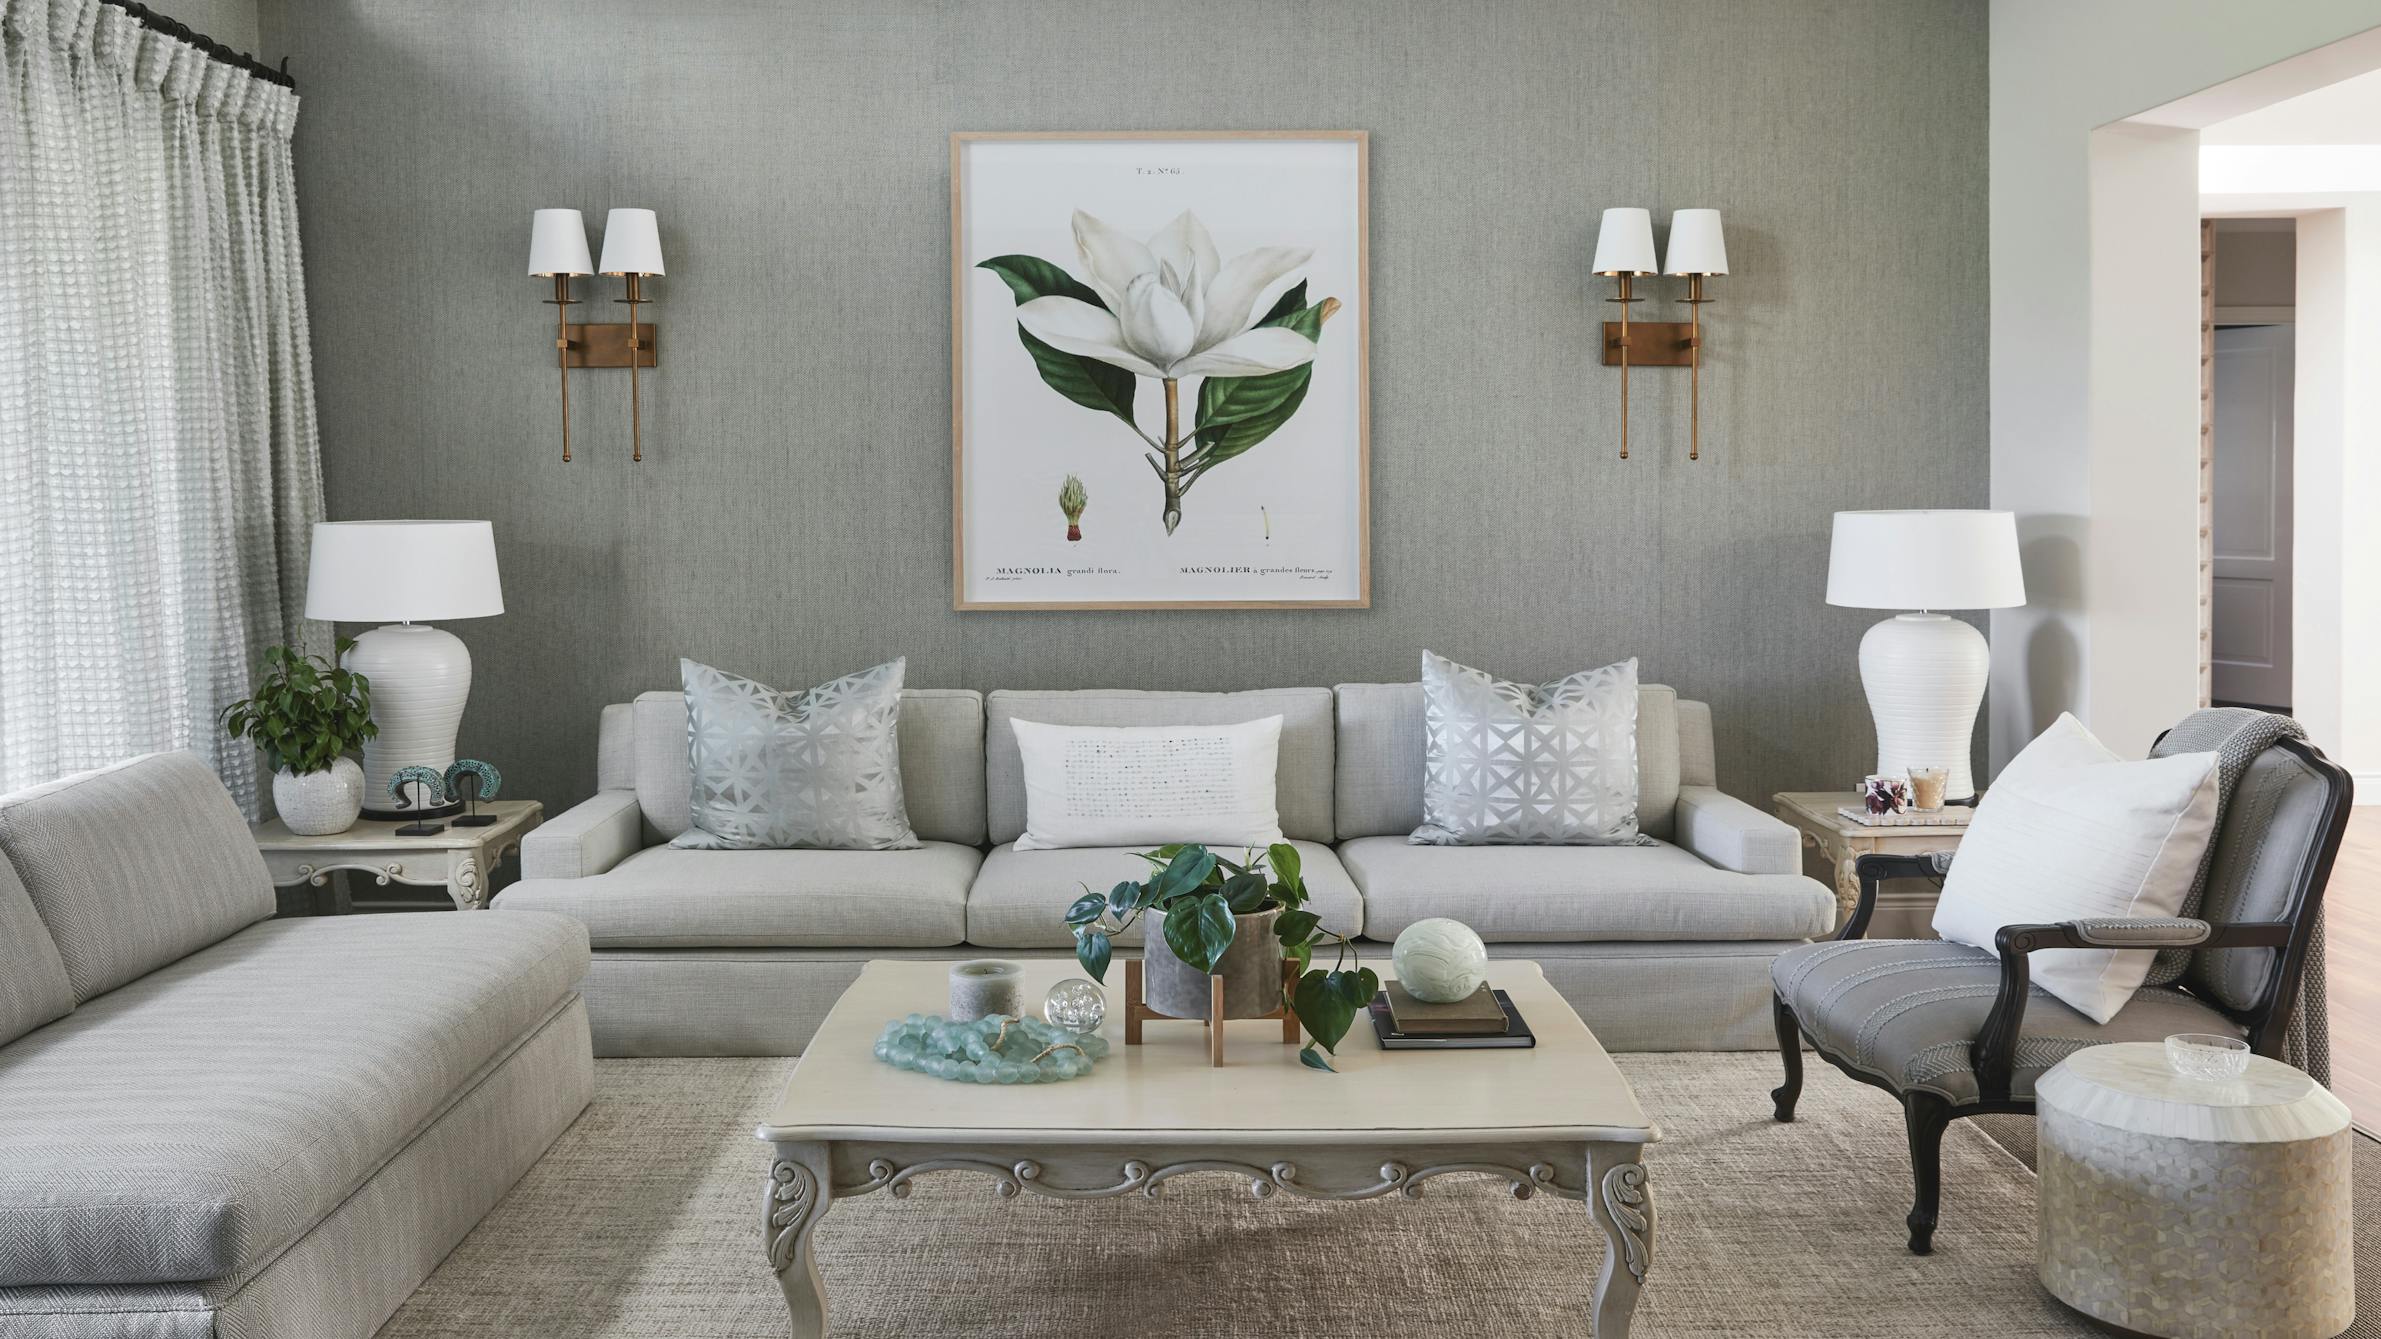 An elegant living room with a neutral, grey colour palette, an ornate coffee table in the middle, surrounded by grey sofas and an armchair with flower artwork on the wall at the back.